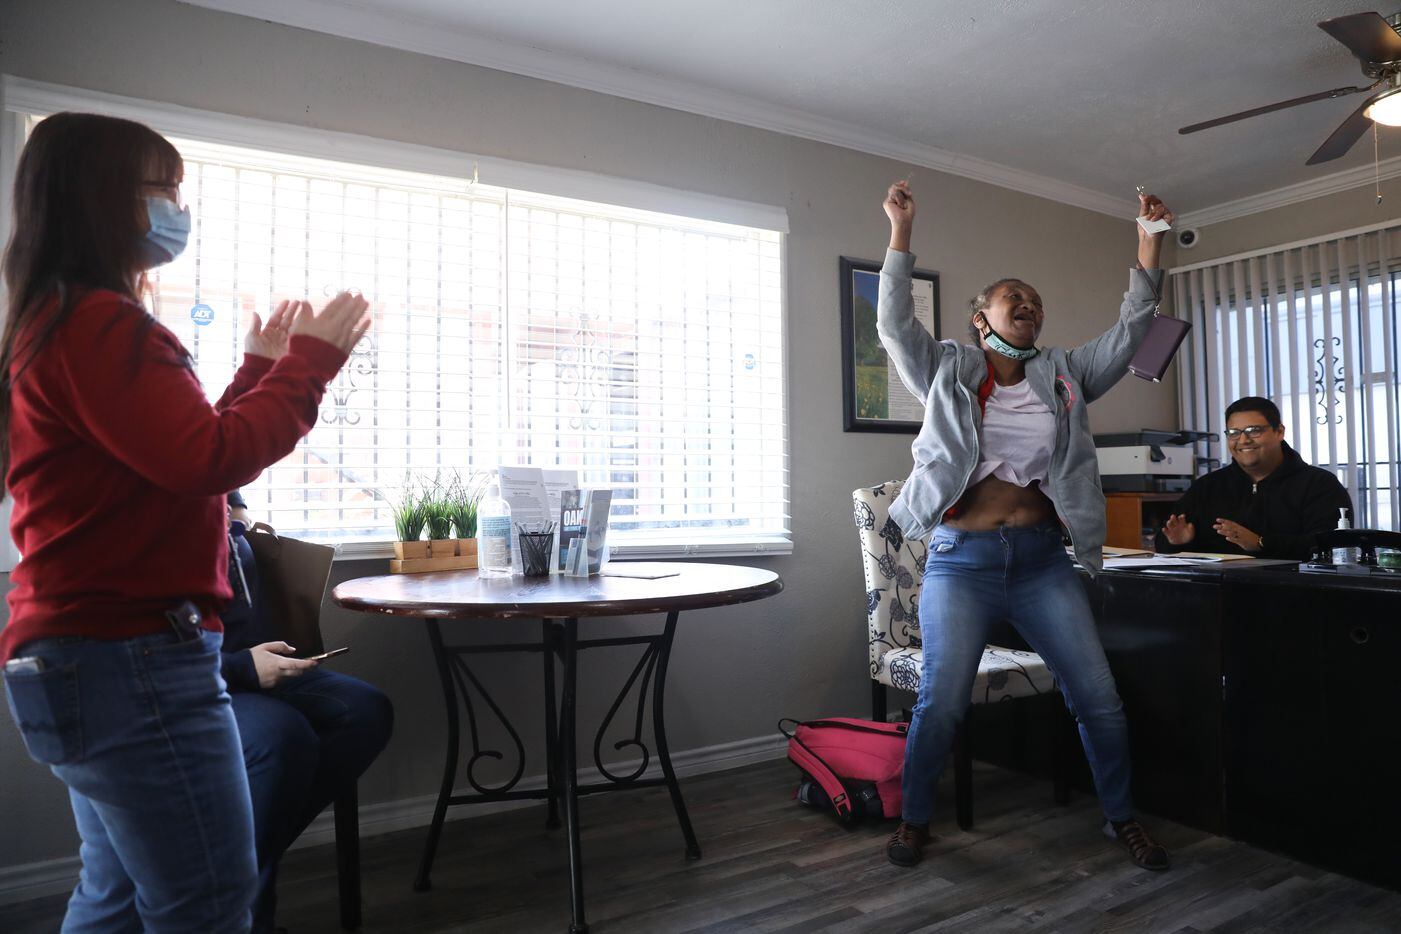 Patricia Freeman (second on the right) jumps up and down with excitement after receiving the key to her new apartment in southern Dallas on November 19, 2021. Staff from The Bridge Homeless Recovery Center and the apartment complex clap for her. (Liesbeth Powers/Special Contributor)